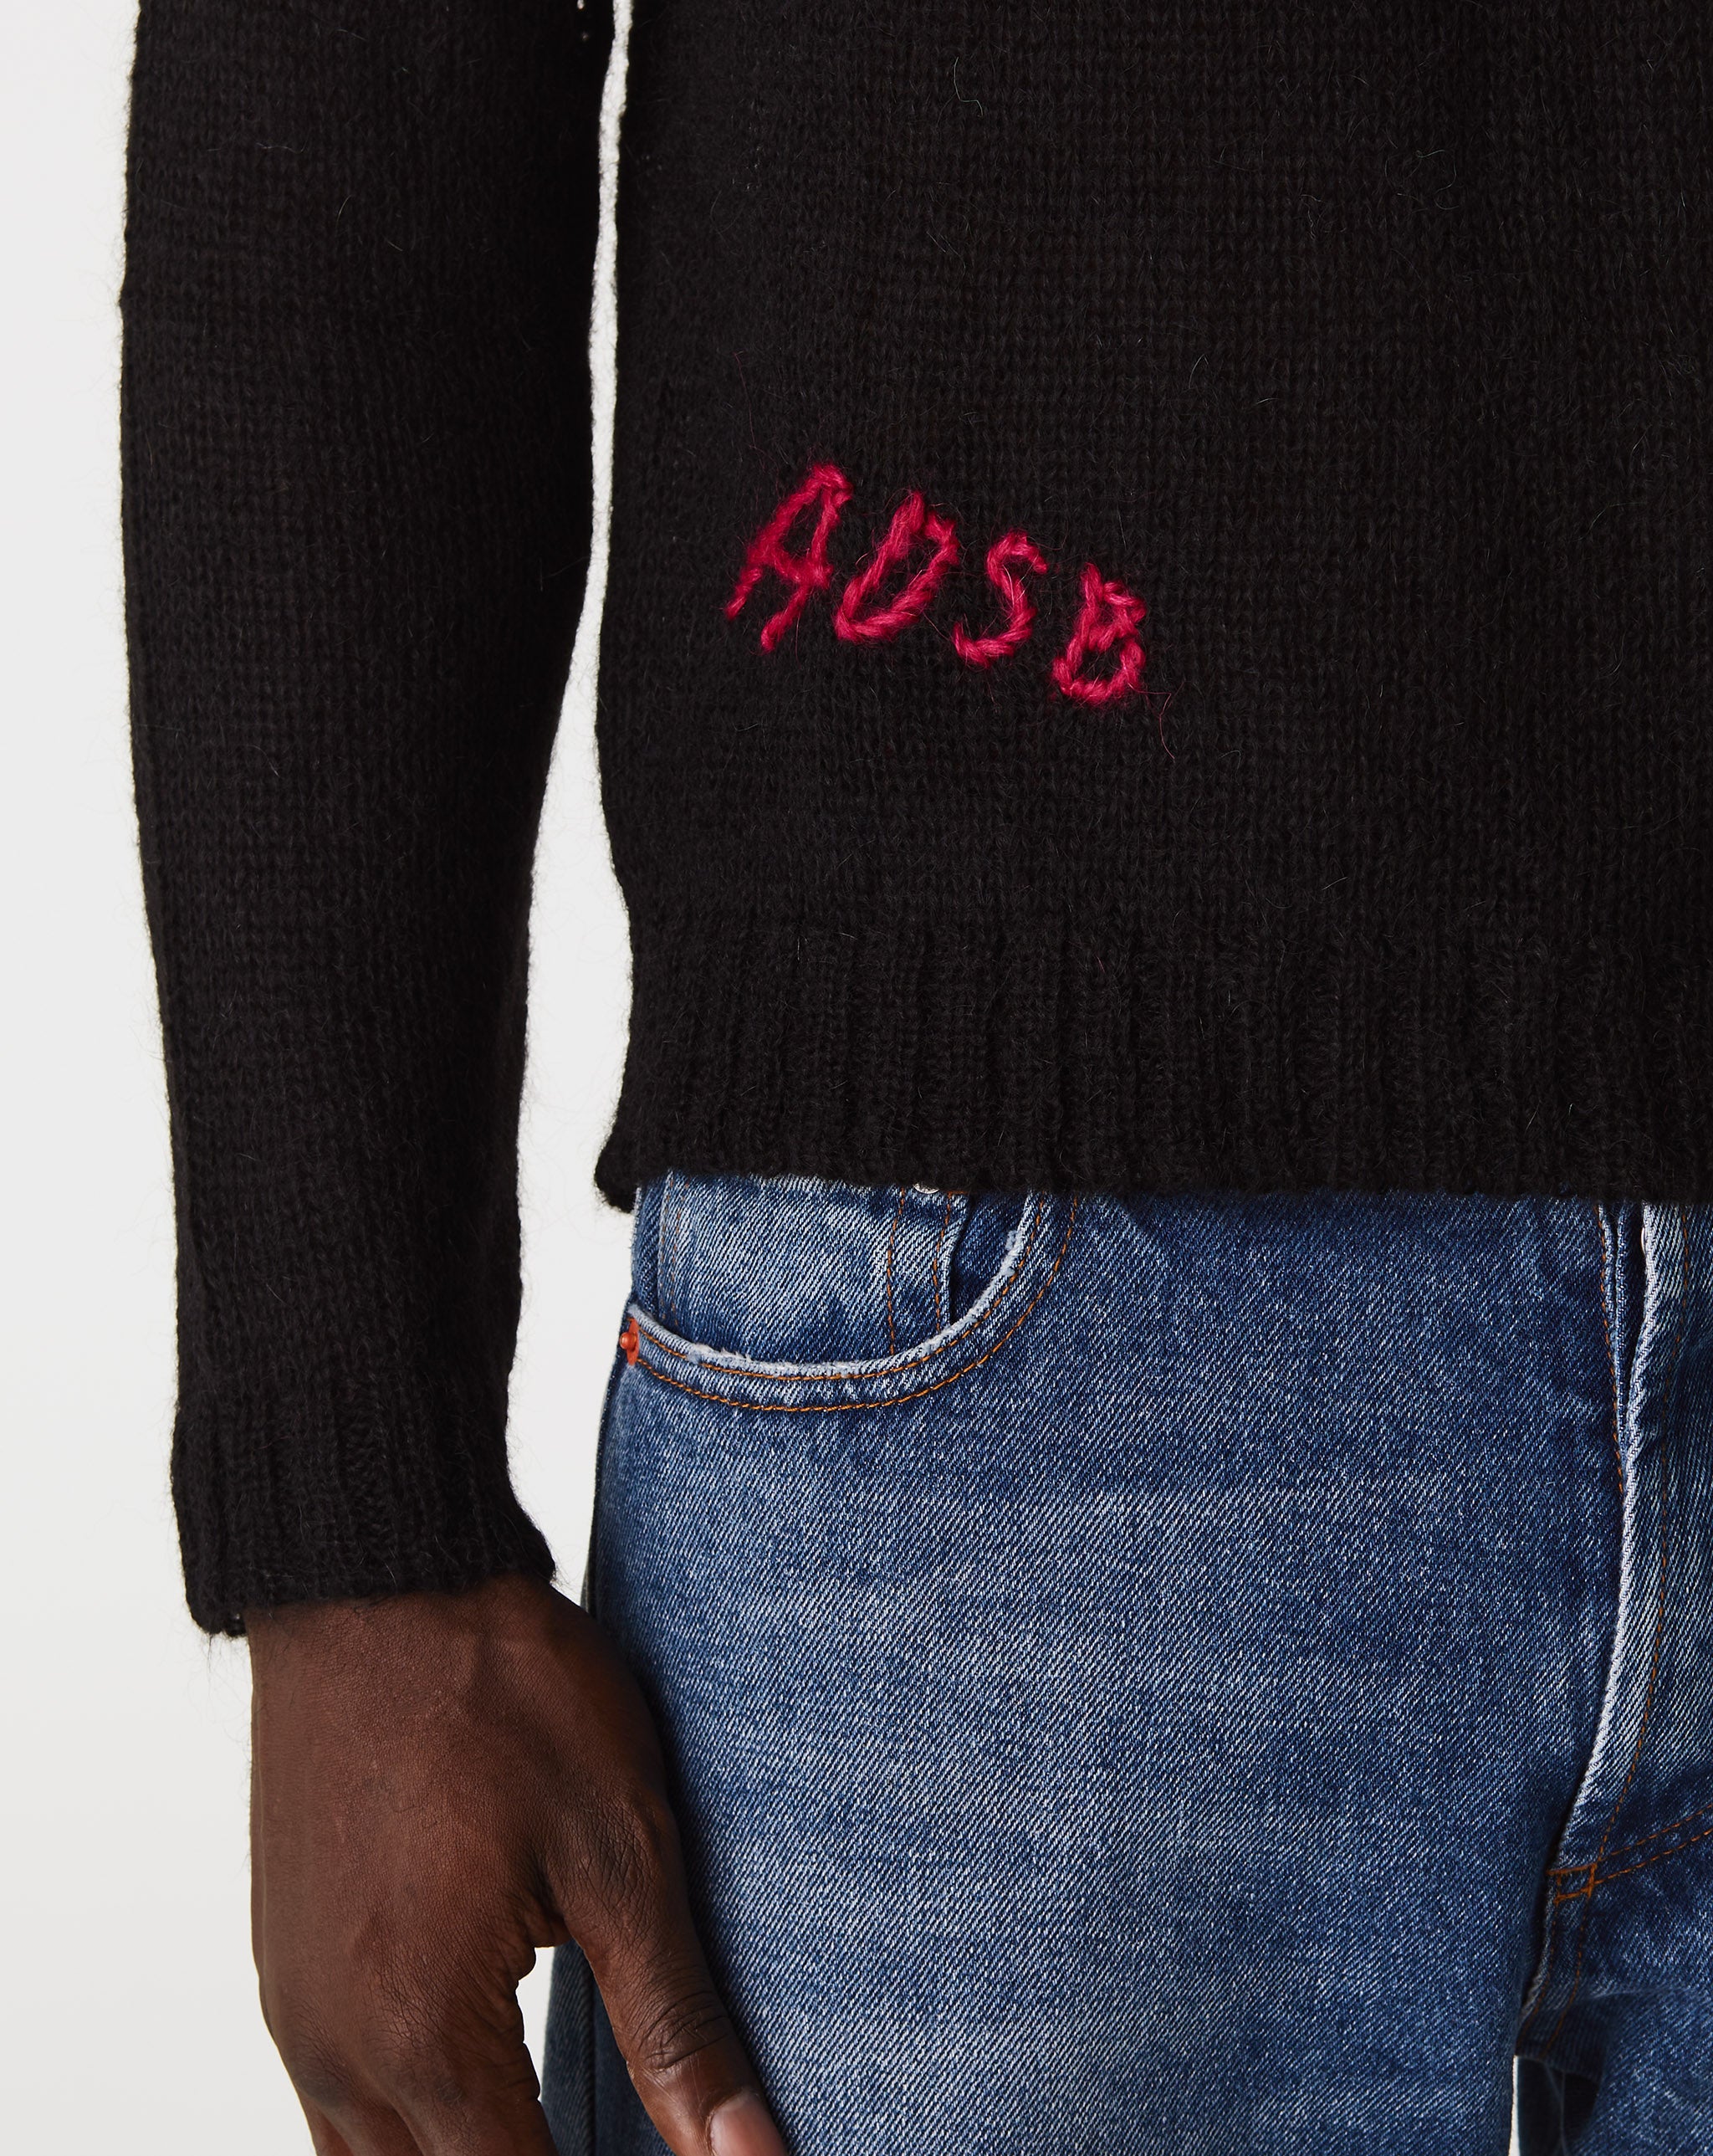 Andersson Bell Kid Mohair Crewneck Sweater  - XHIBITION